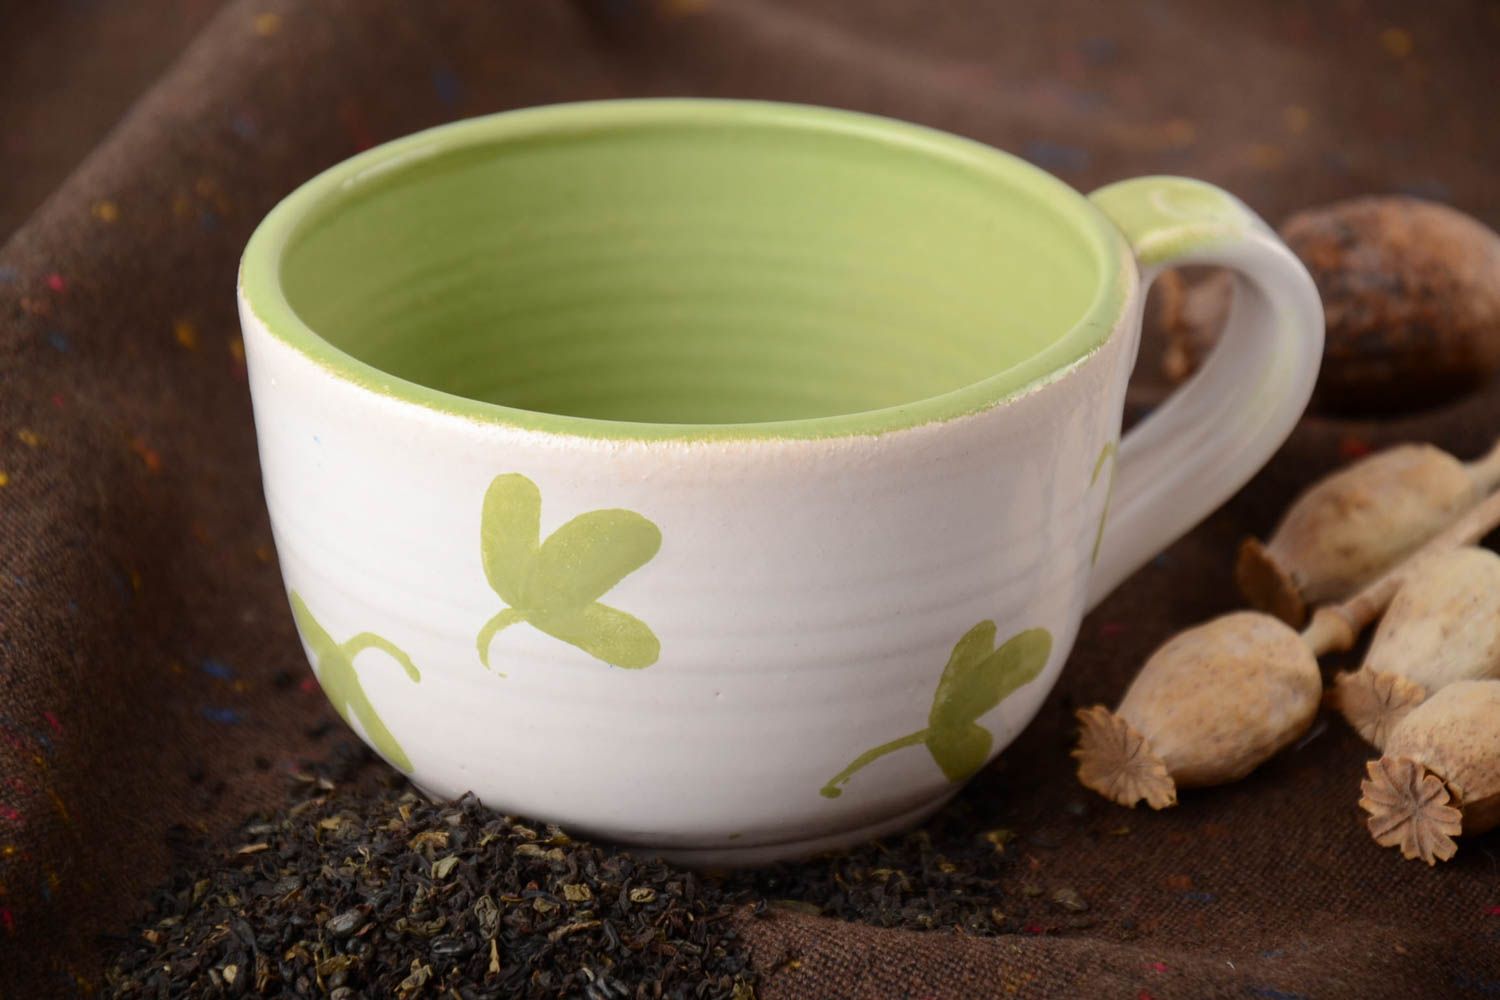 11 oz lime glazed ceramic teacup with handle and heart pattern photo 1